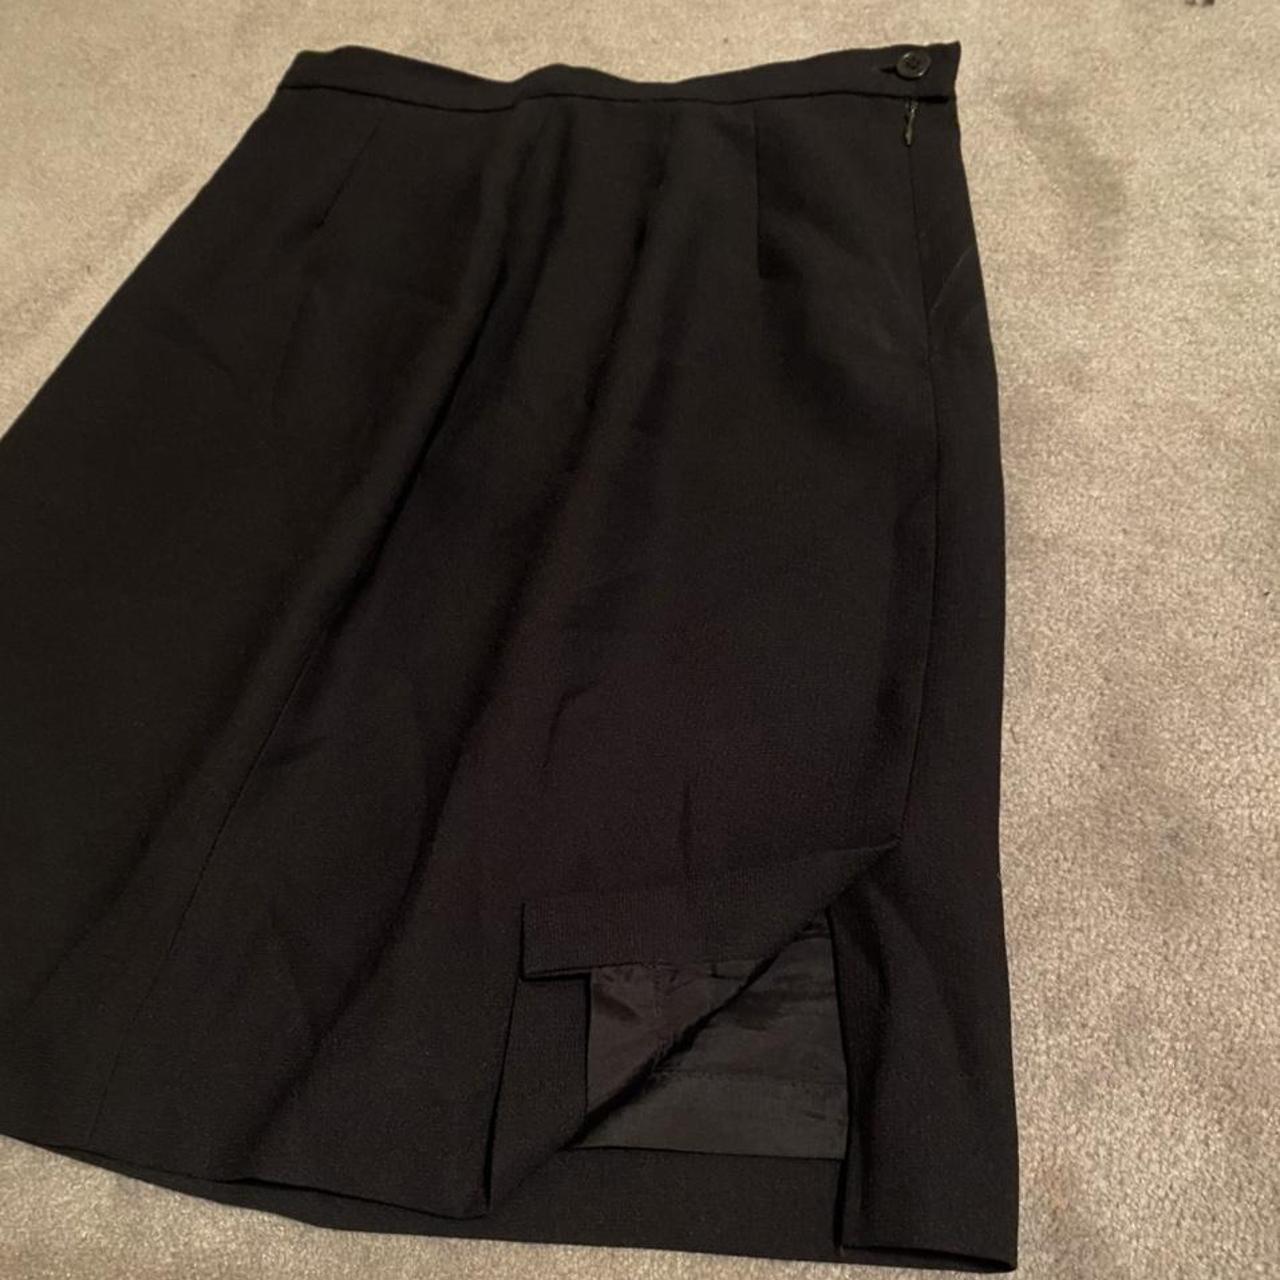 Product Image 2 - Black skirt 
brand: unknown bought